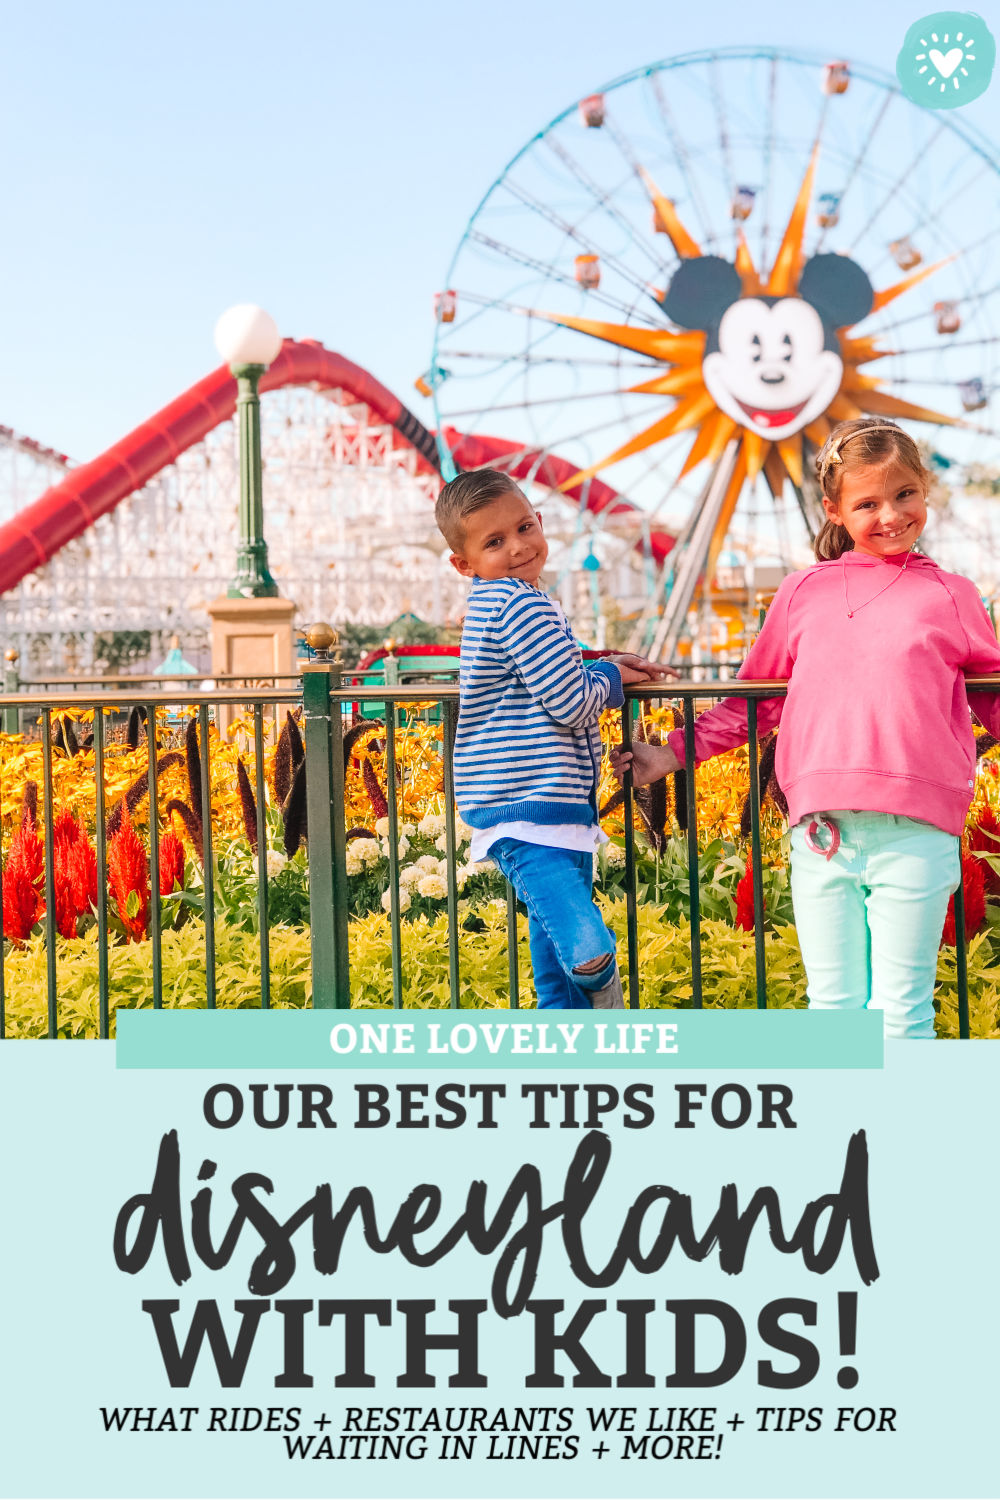 Our Best Tips For Disneyland with Kids from One Lovely Life